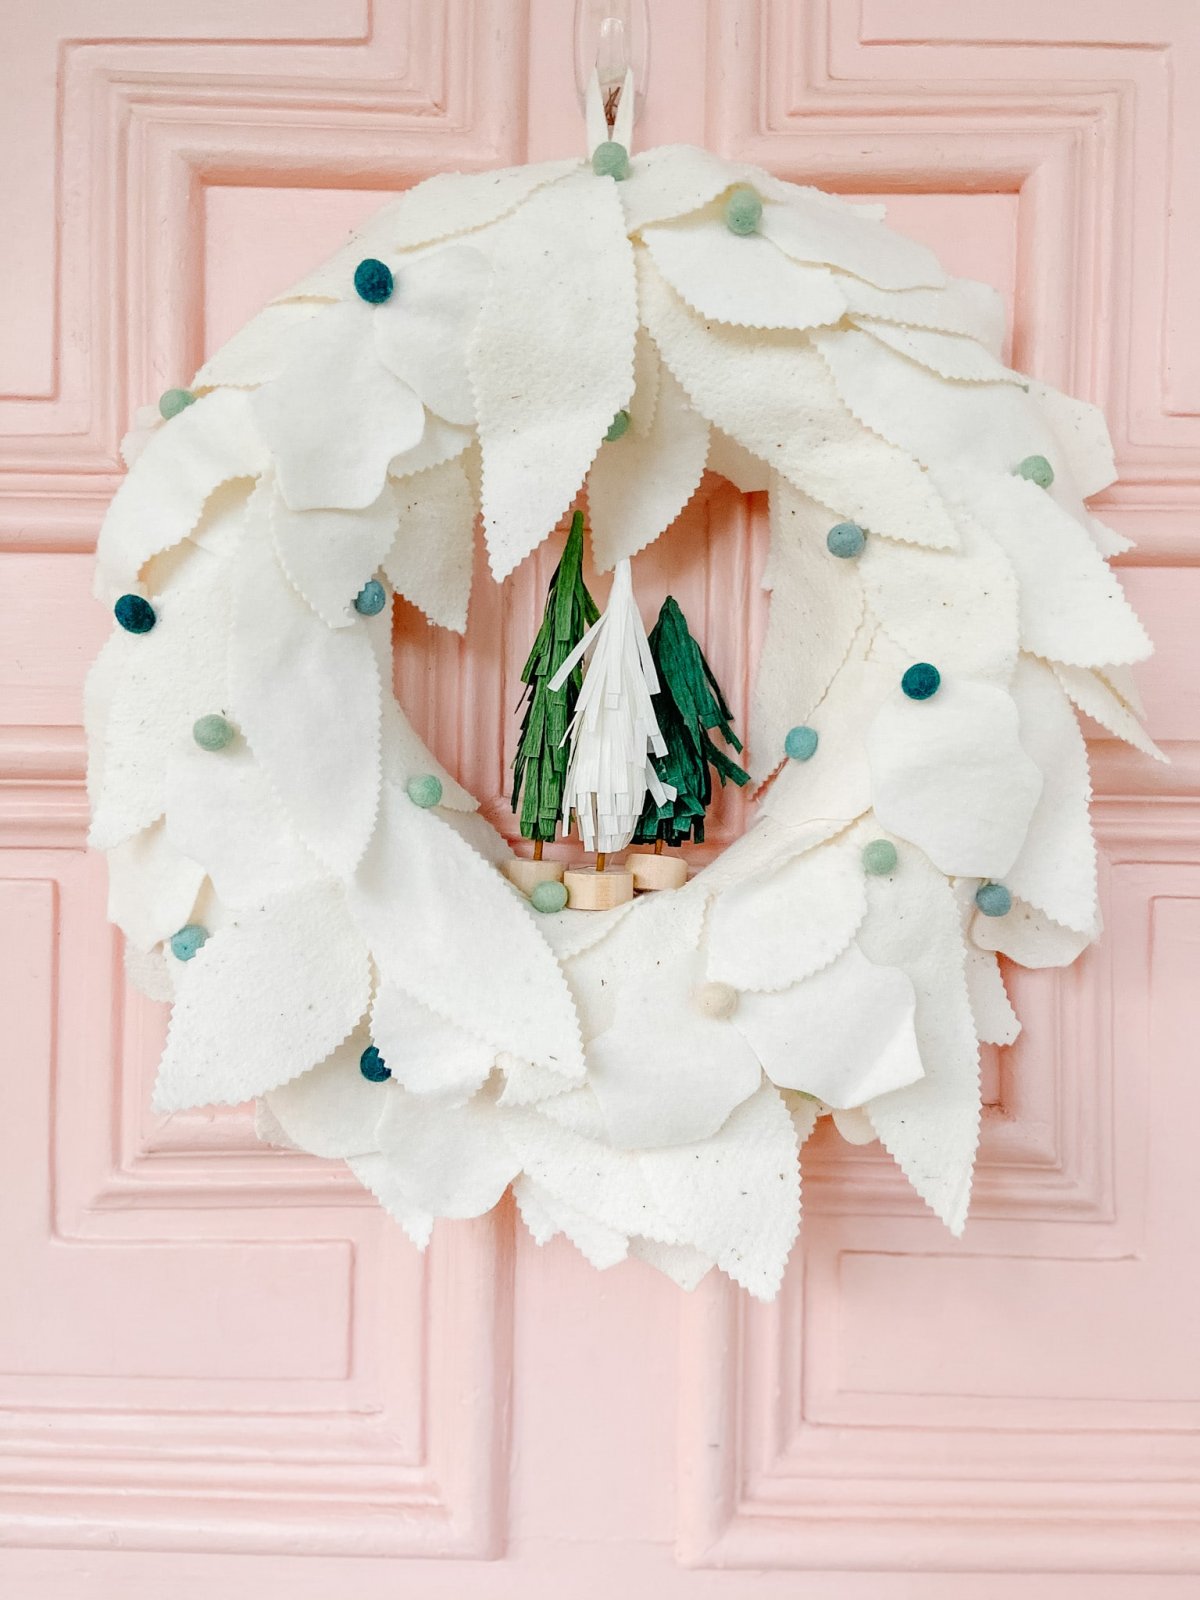 Anthropologie-Inspired Holiday Felt Wreath. Create a whimsical holiday wreath with layers of fluffy wool, felted balls and adorable tissue paper trees. 